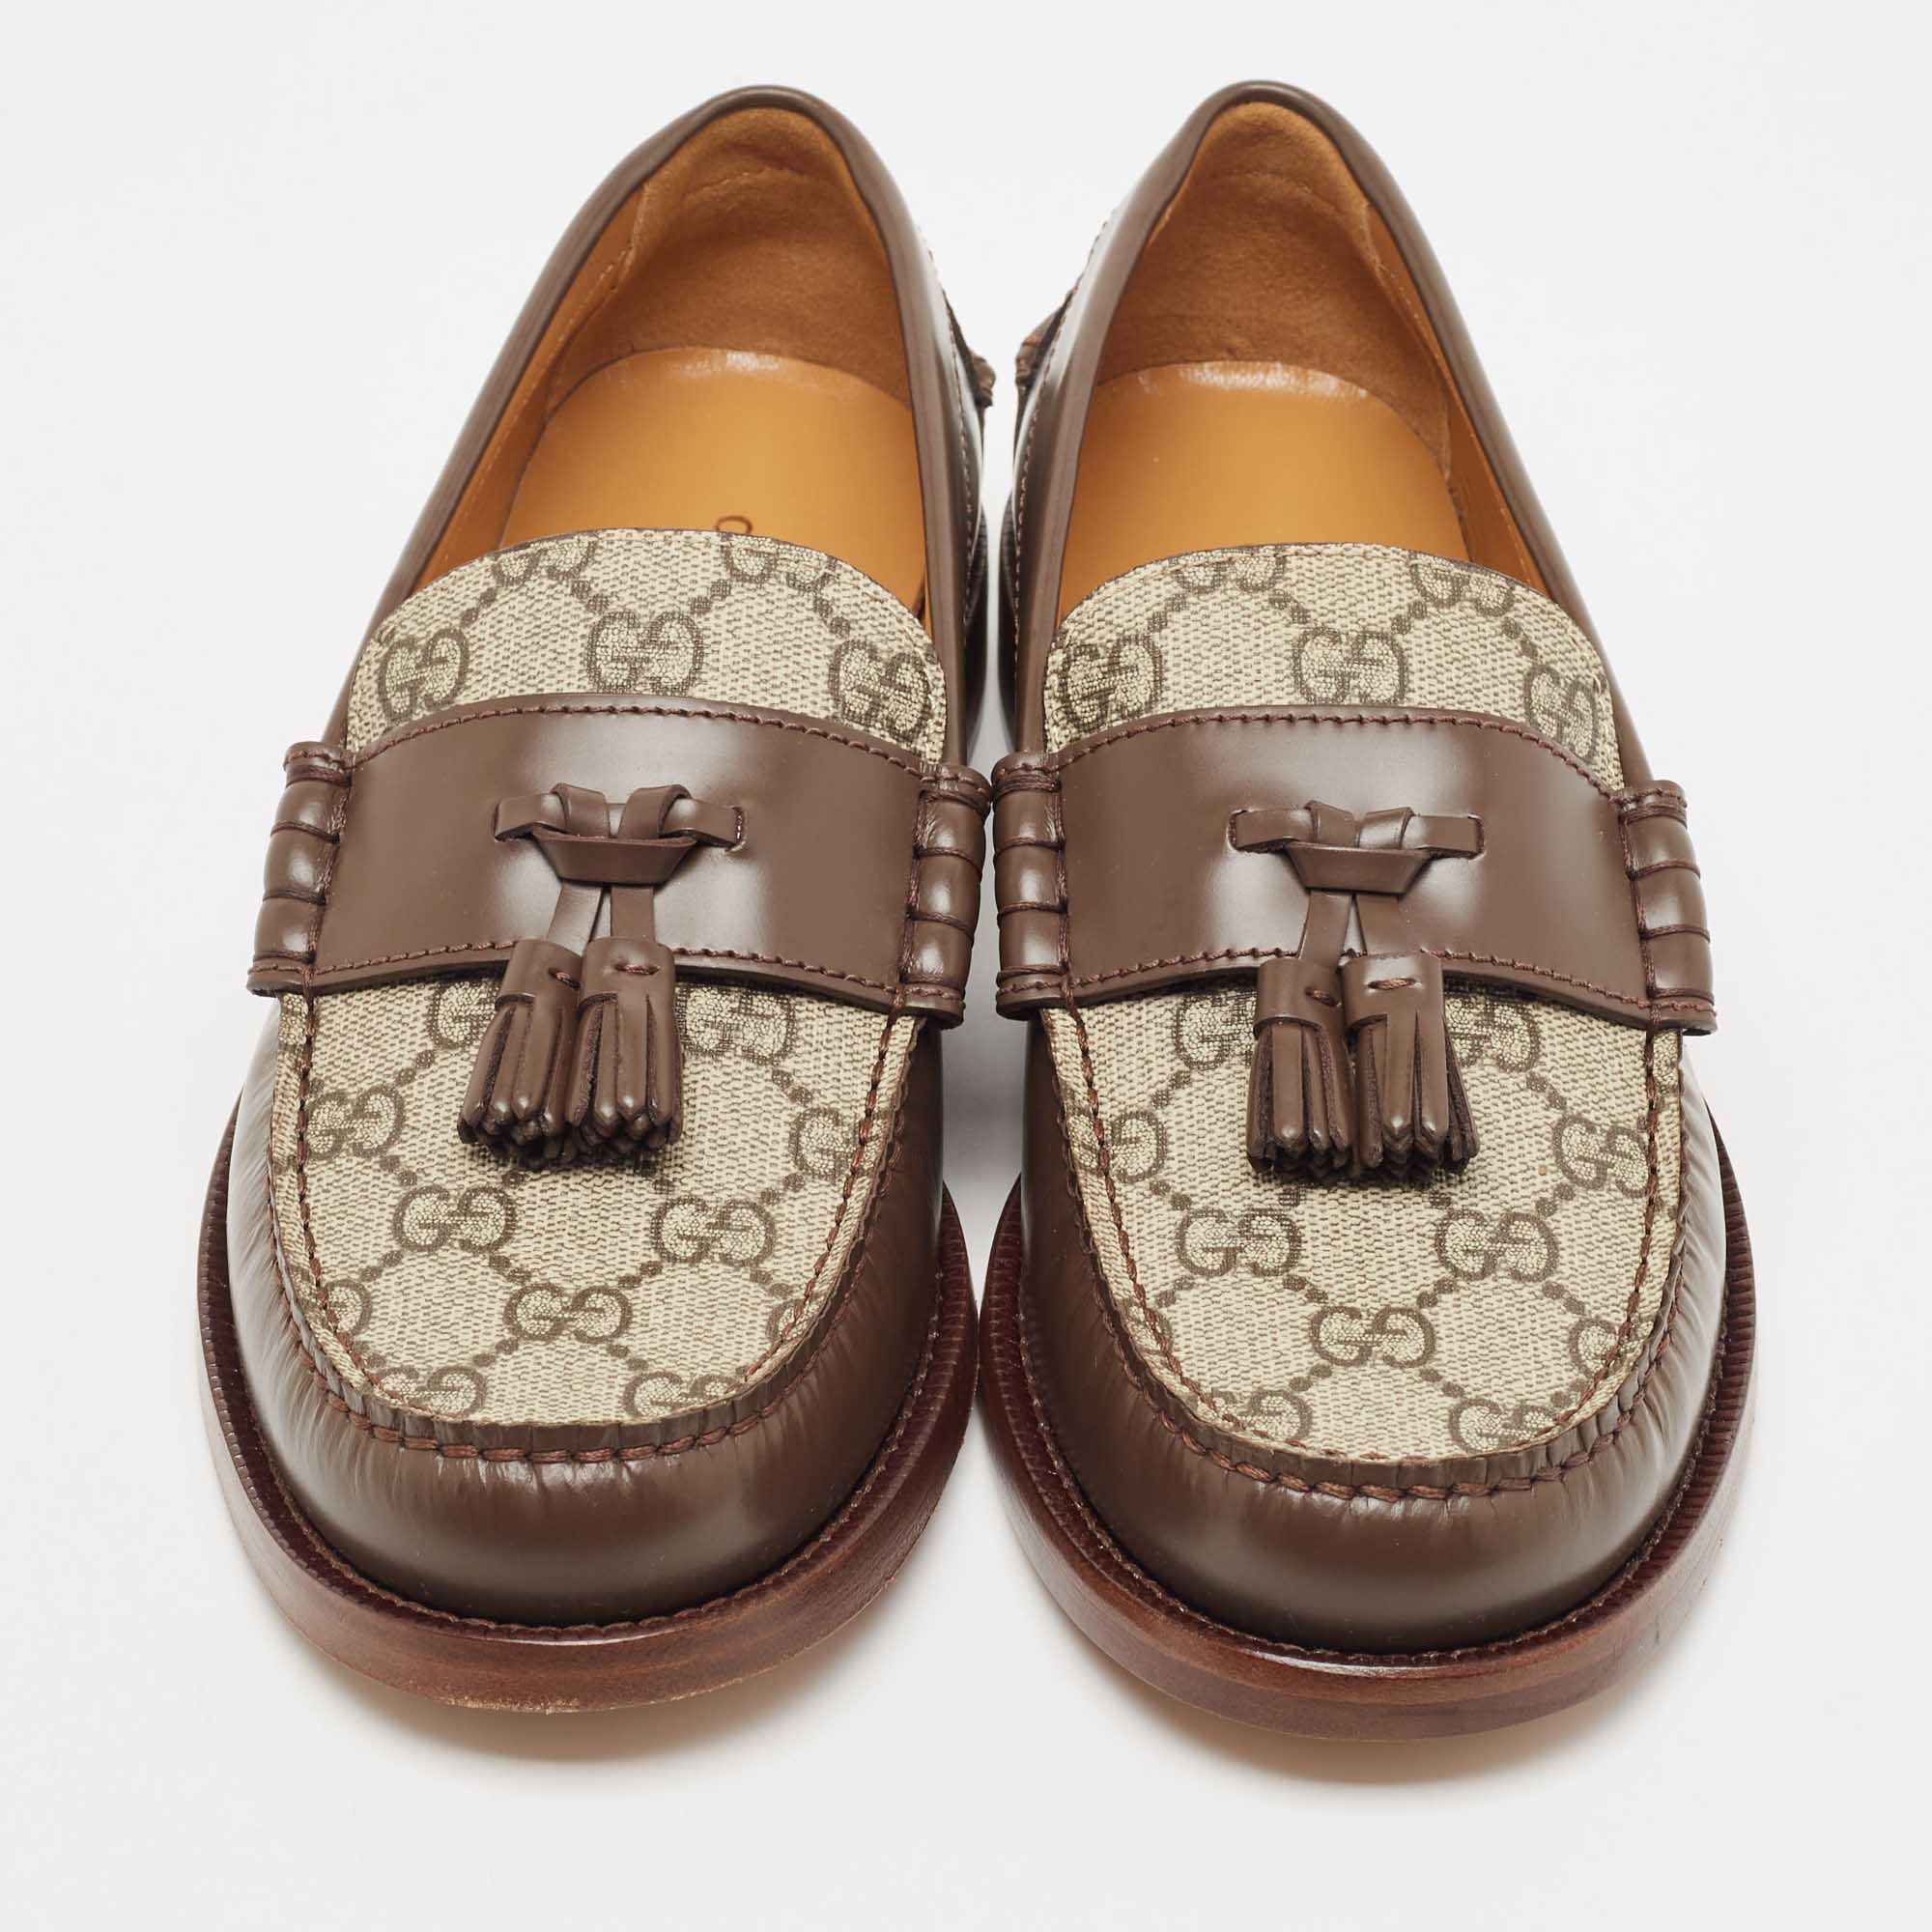 Gucci Beige/Brown GG Supreme Canvas And Leather Tassel Loafers Size 38